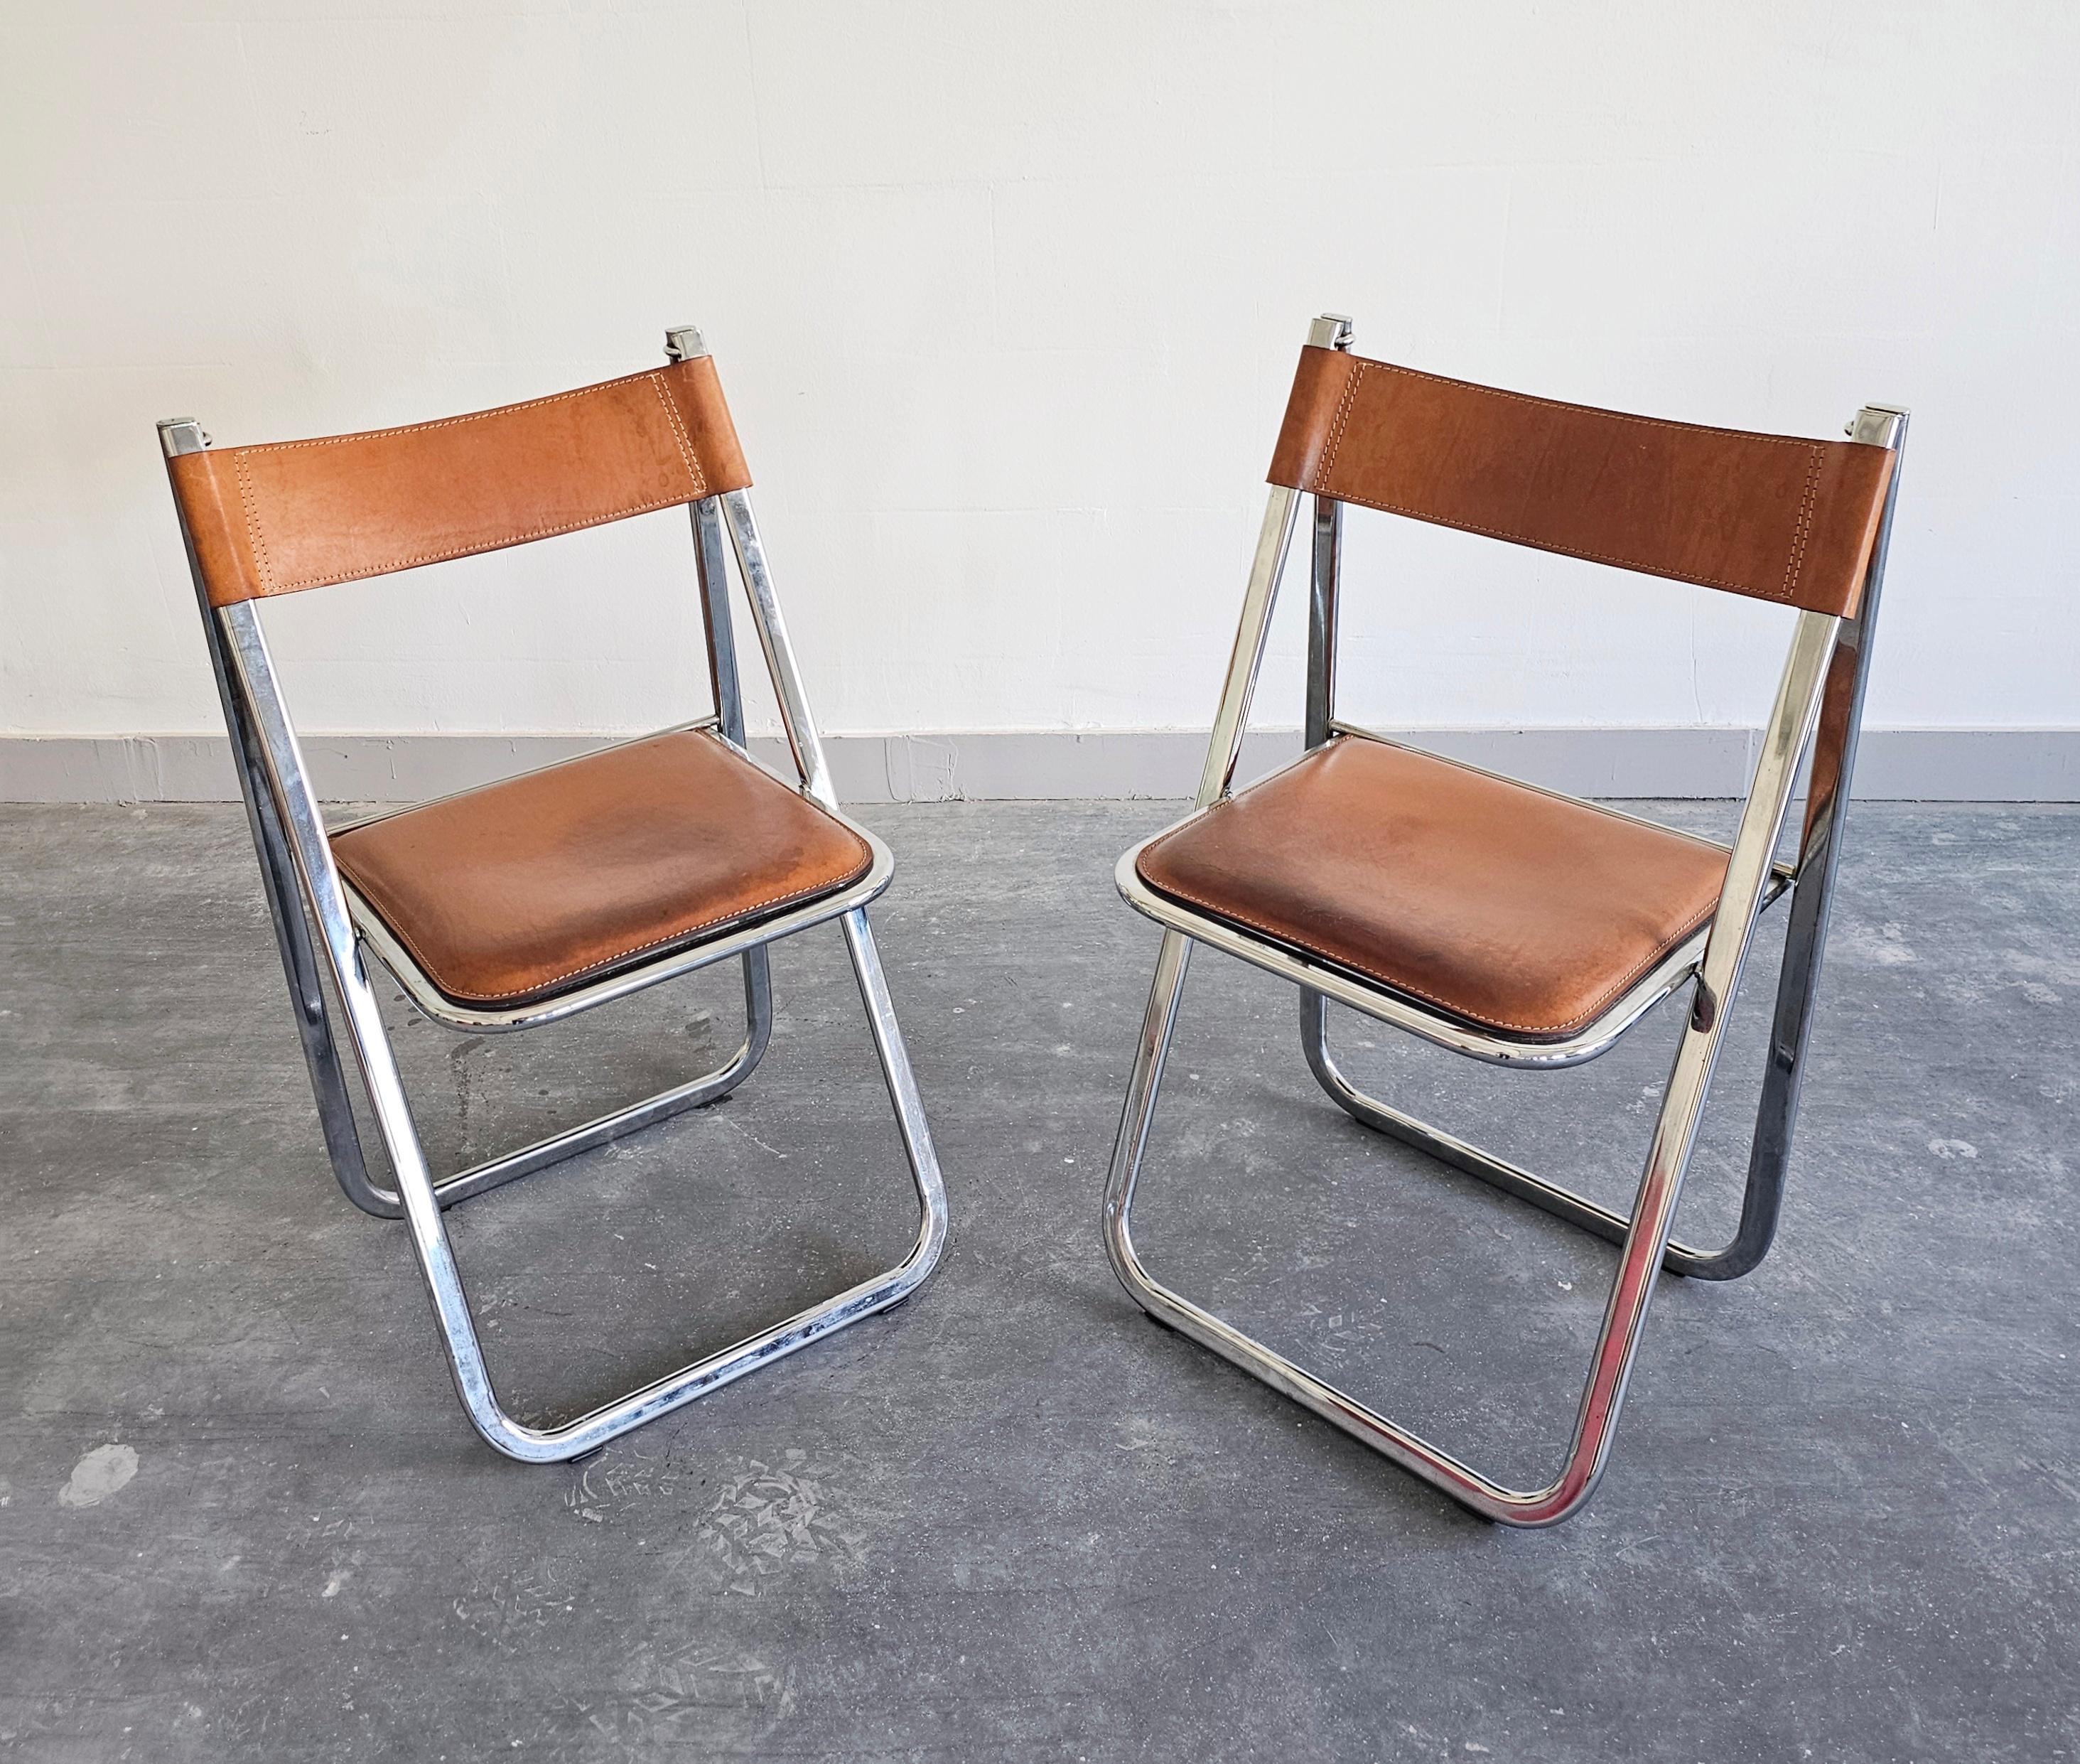 In this listing you will find a pair of exceptionally rare postmodern folding chairs manufactured by Arrben. They feature chrome plated steel frames and cognac leather seats and back rests. Made in Italy in 1970s. Logo of the manufacturer is visible